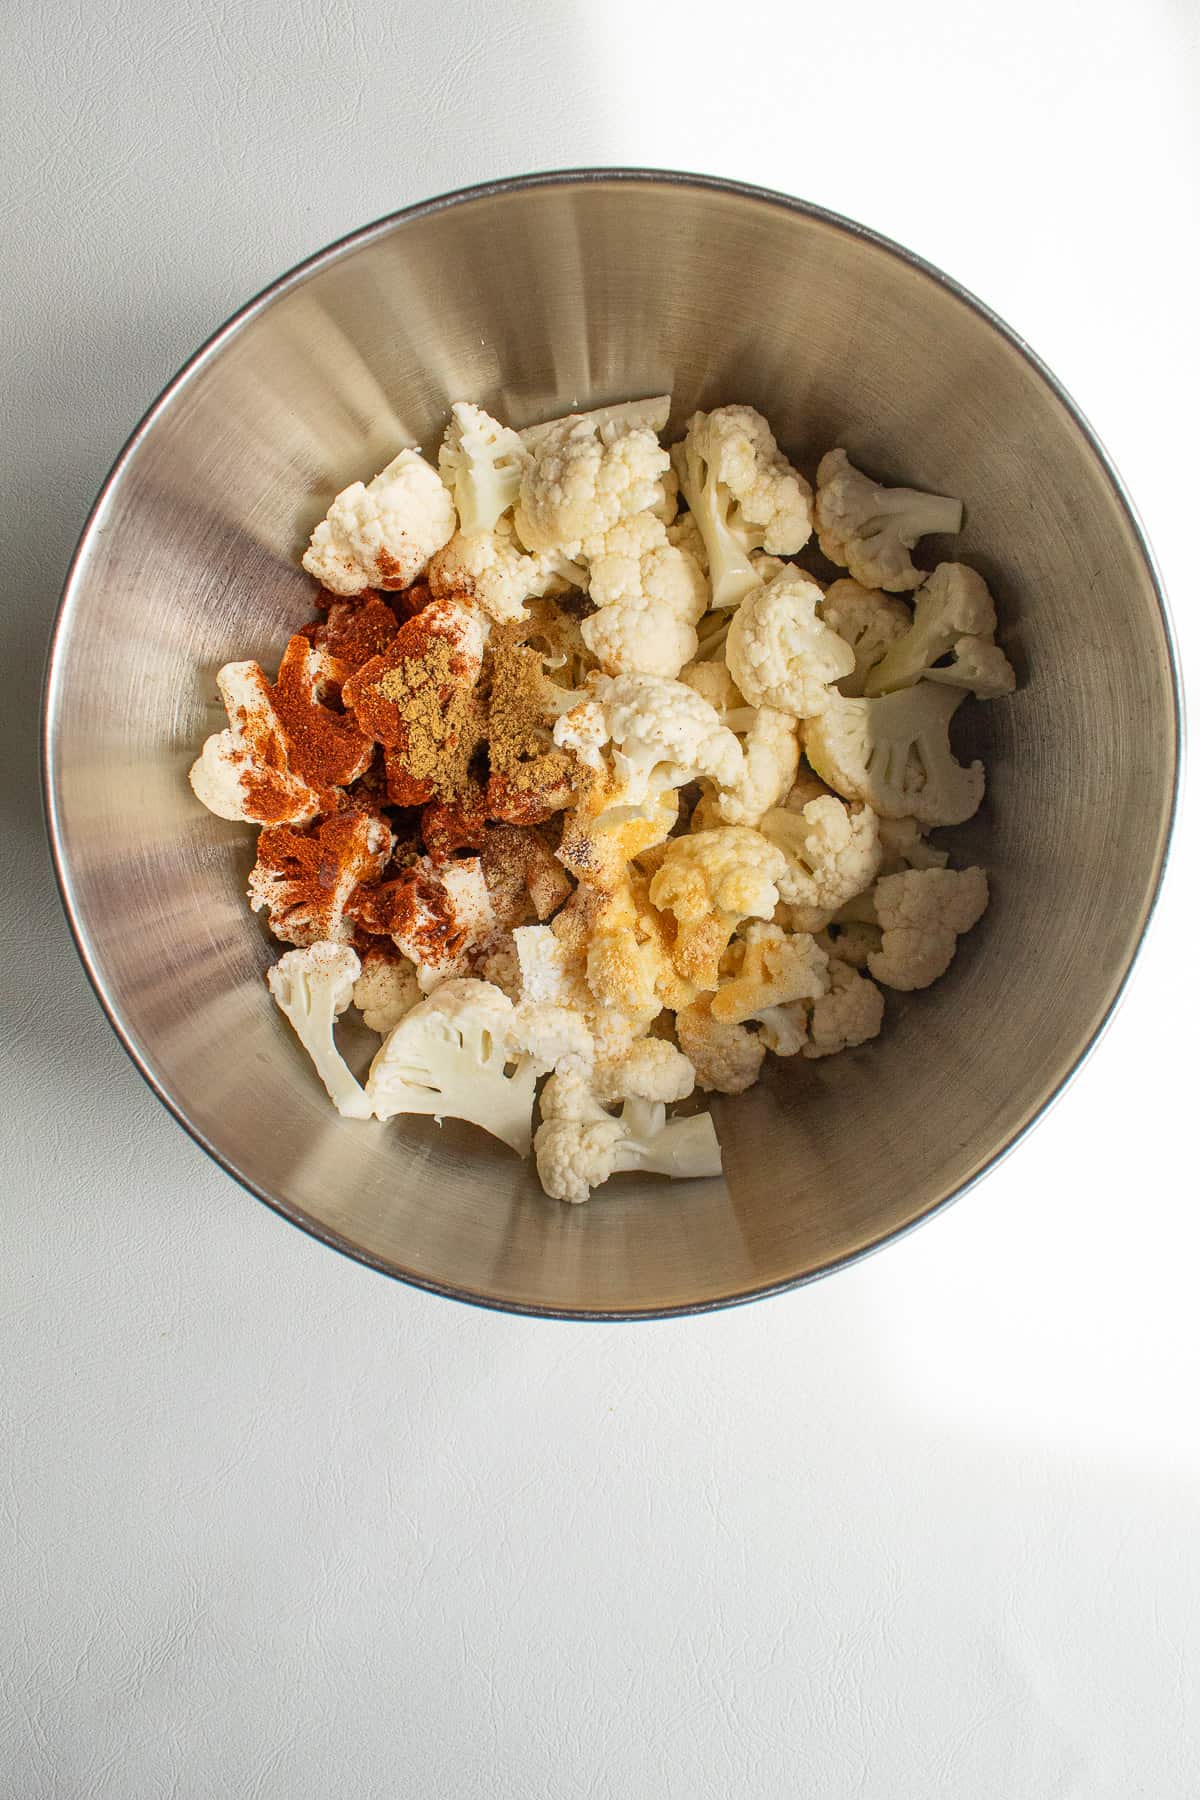 Cauliflower florets in a stainless steel bowl with spices sprinkled over the top.